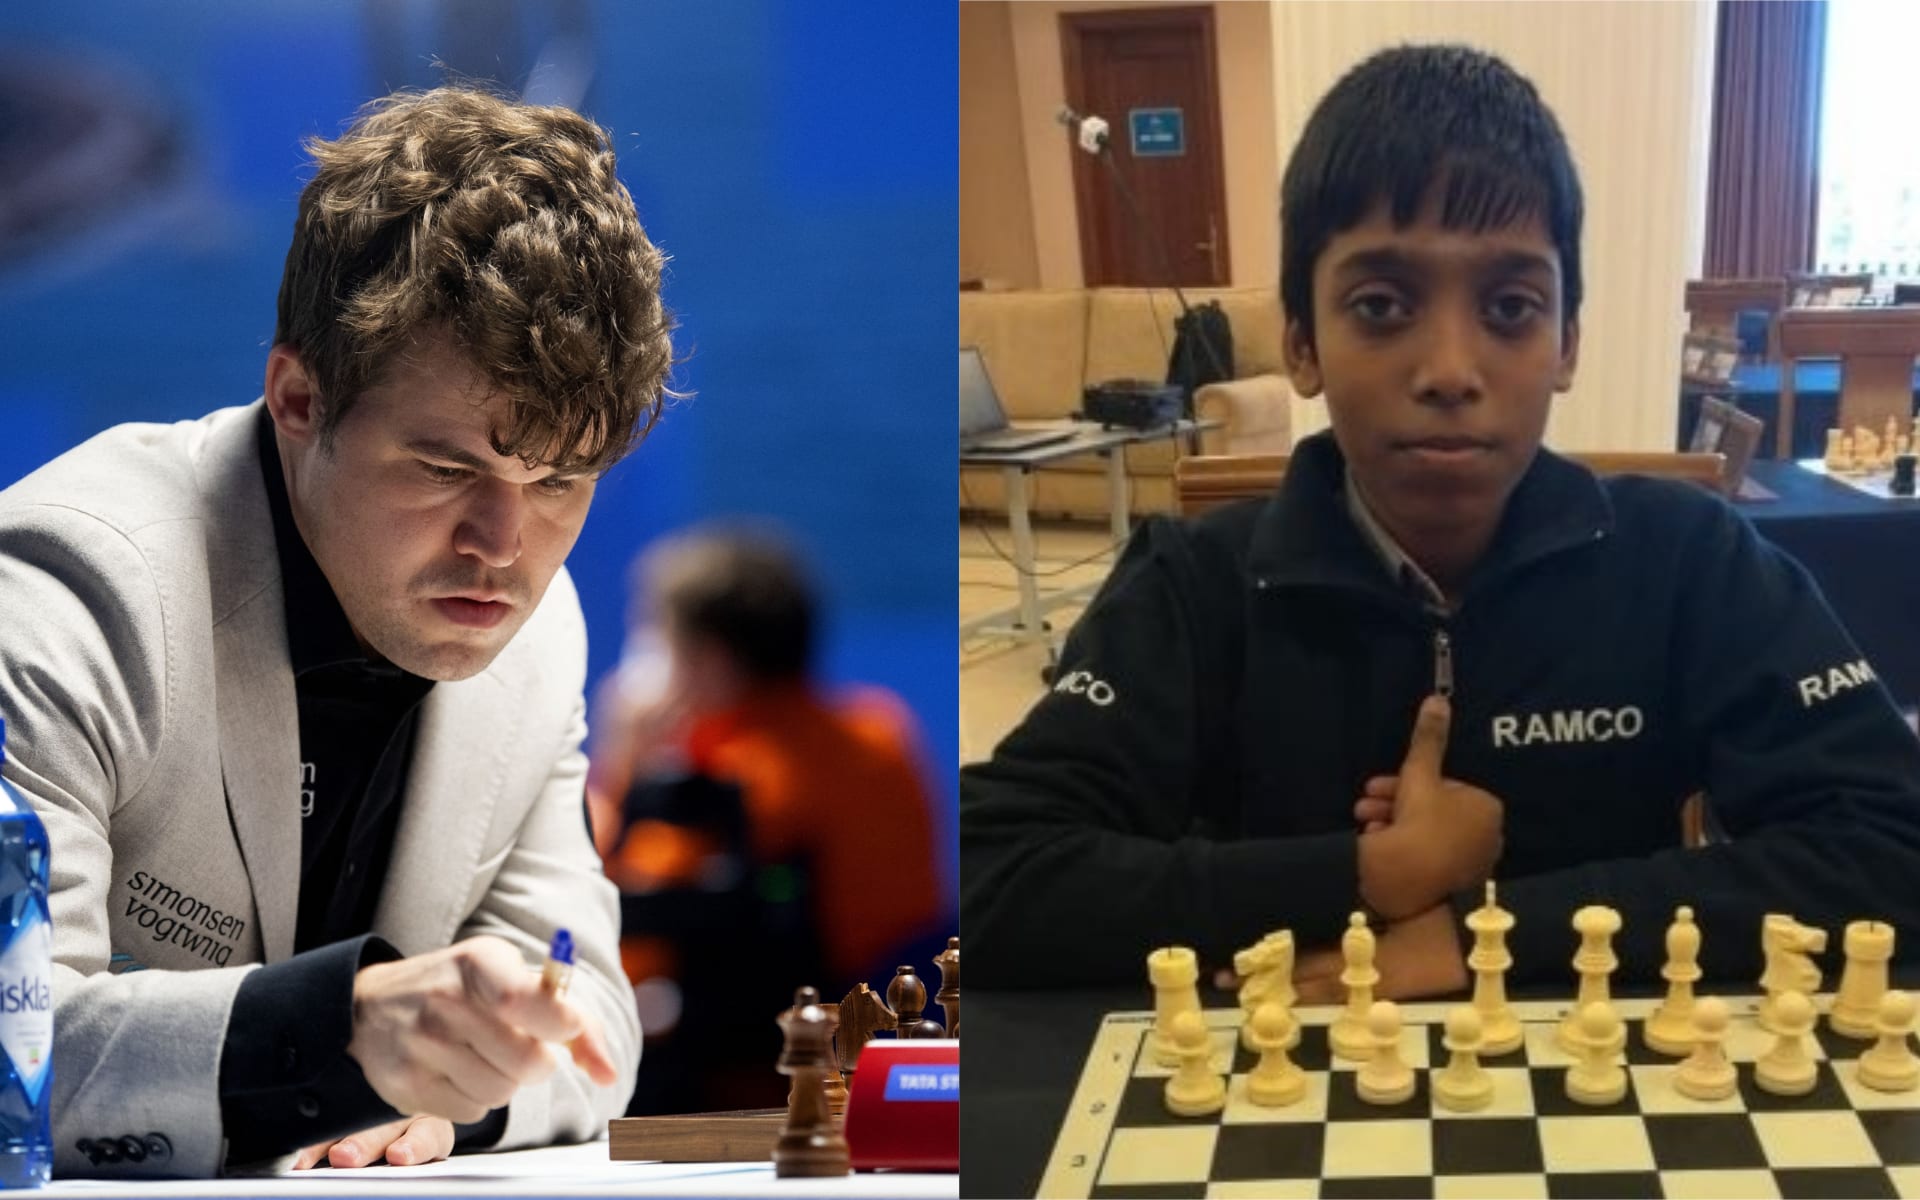 While Praggnanandhaa's (right) victory over Mr Carlsen does not affect the International Chess Federation world title, it nevertheless stunned the chess world and elated people in India.